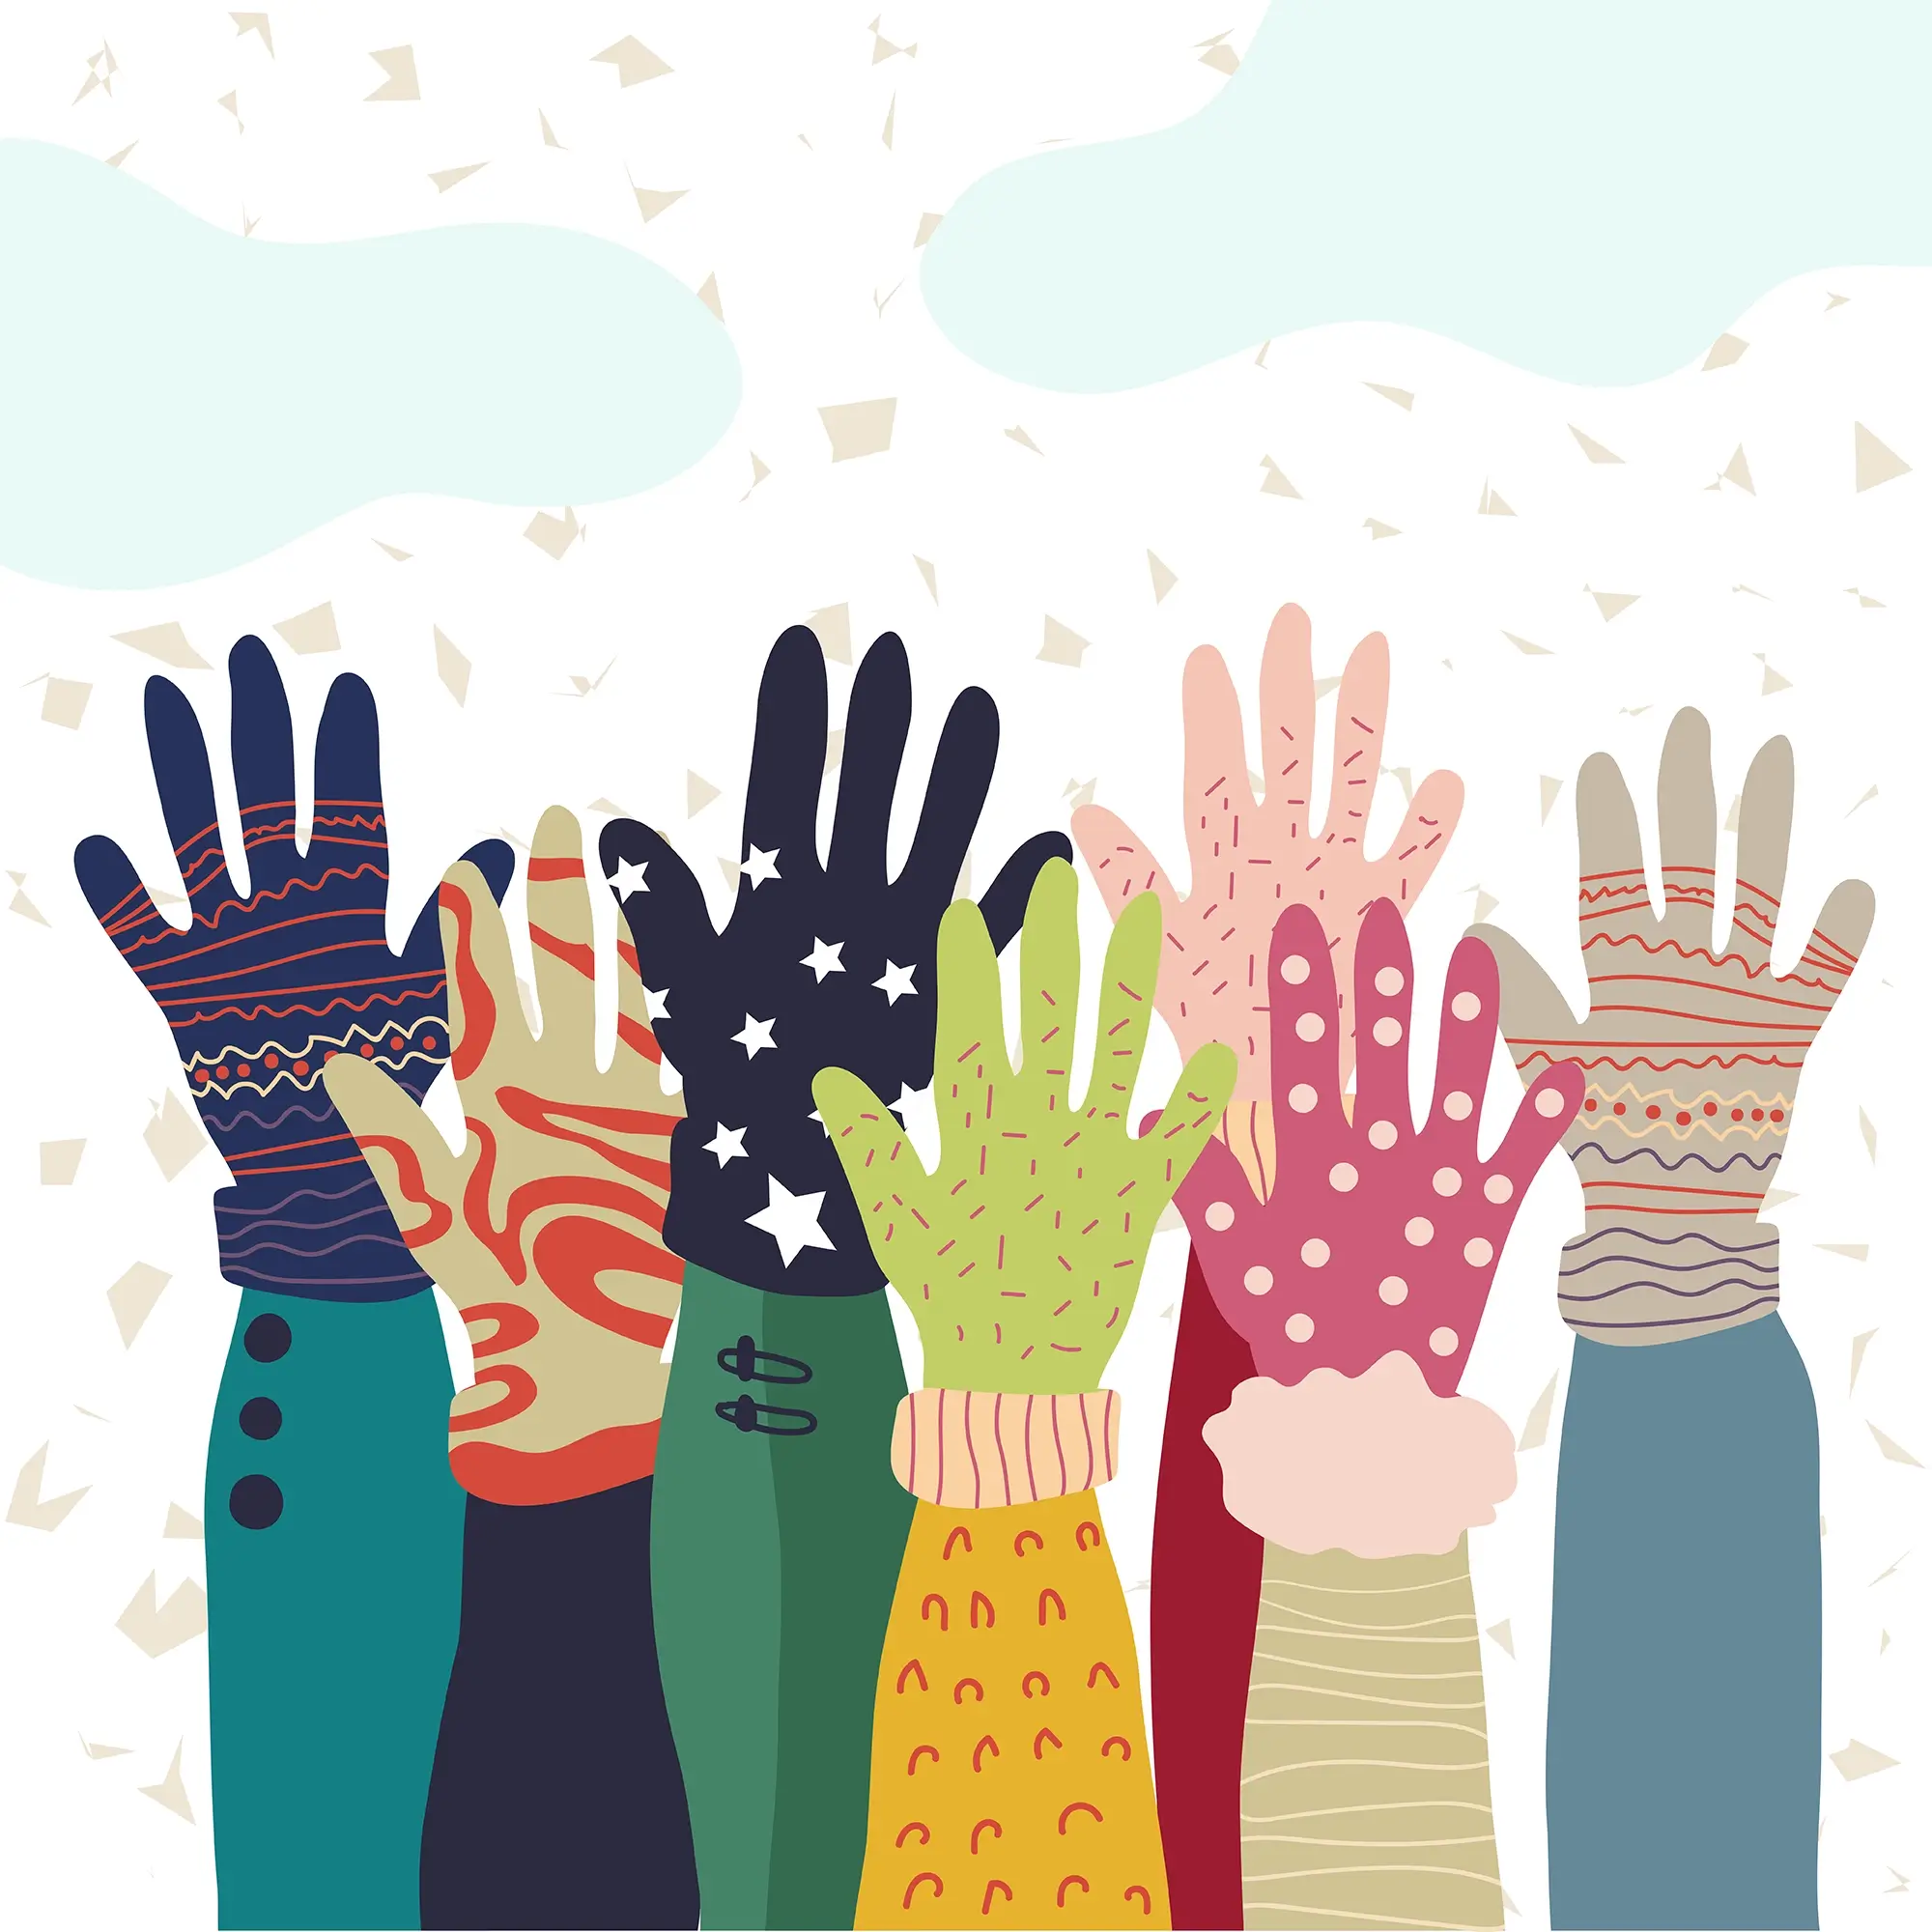 Illustration: A symbol of freedom portrayed through raised hands adorned with various models of gloves, celebrating diversity and individuality. Created by Milena Stanisavljevic. Explore more at miletart.com